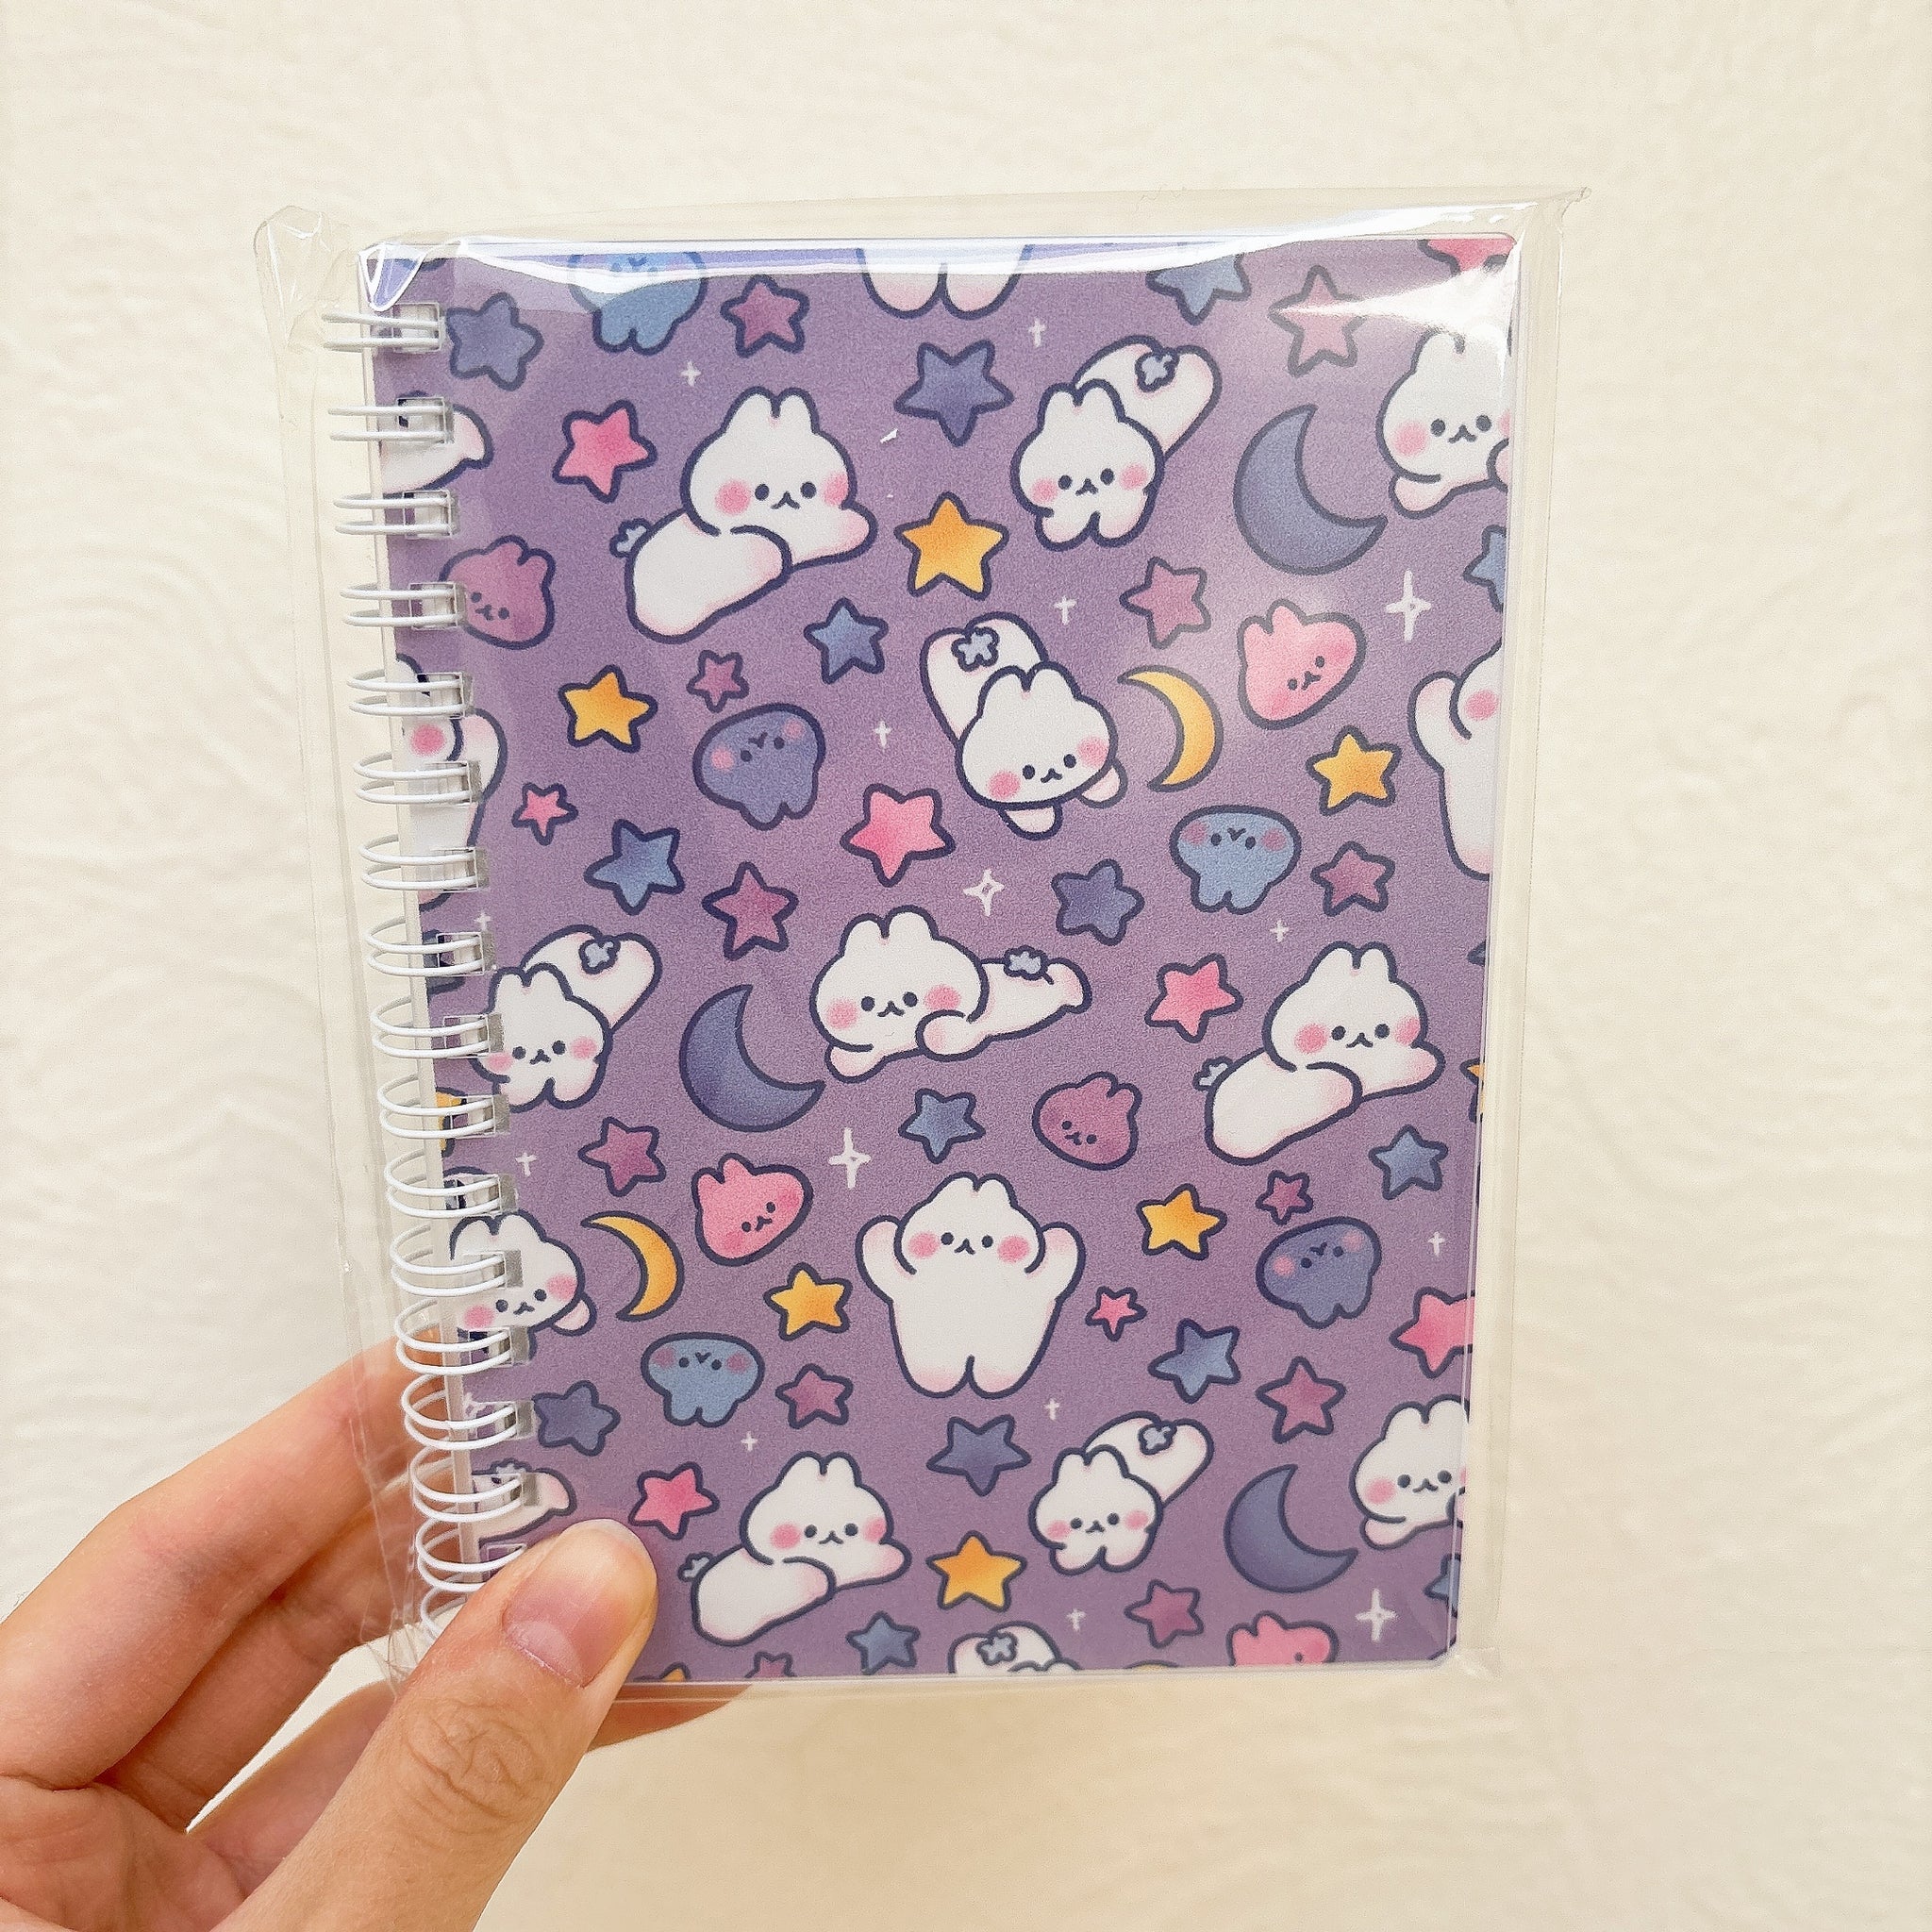 A6 SMALL SIZE Bunny Patterned Reusable Sticker Books